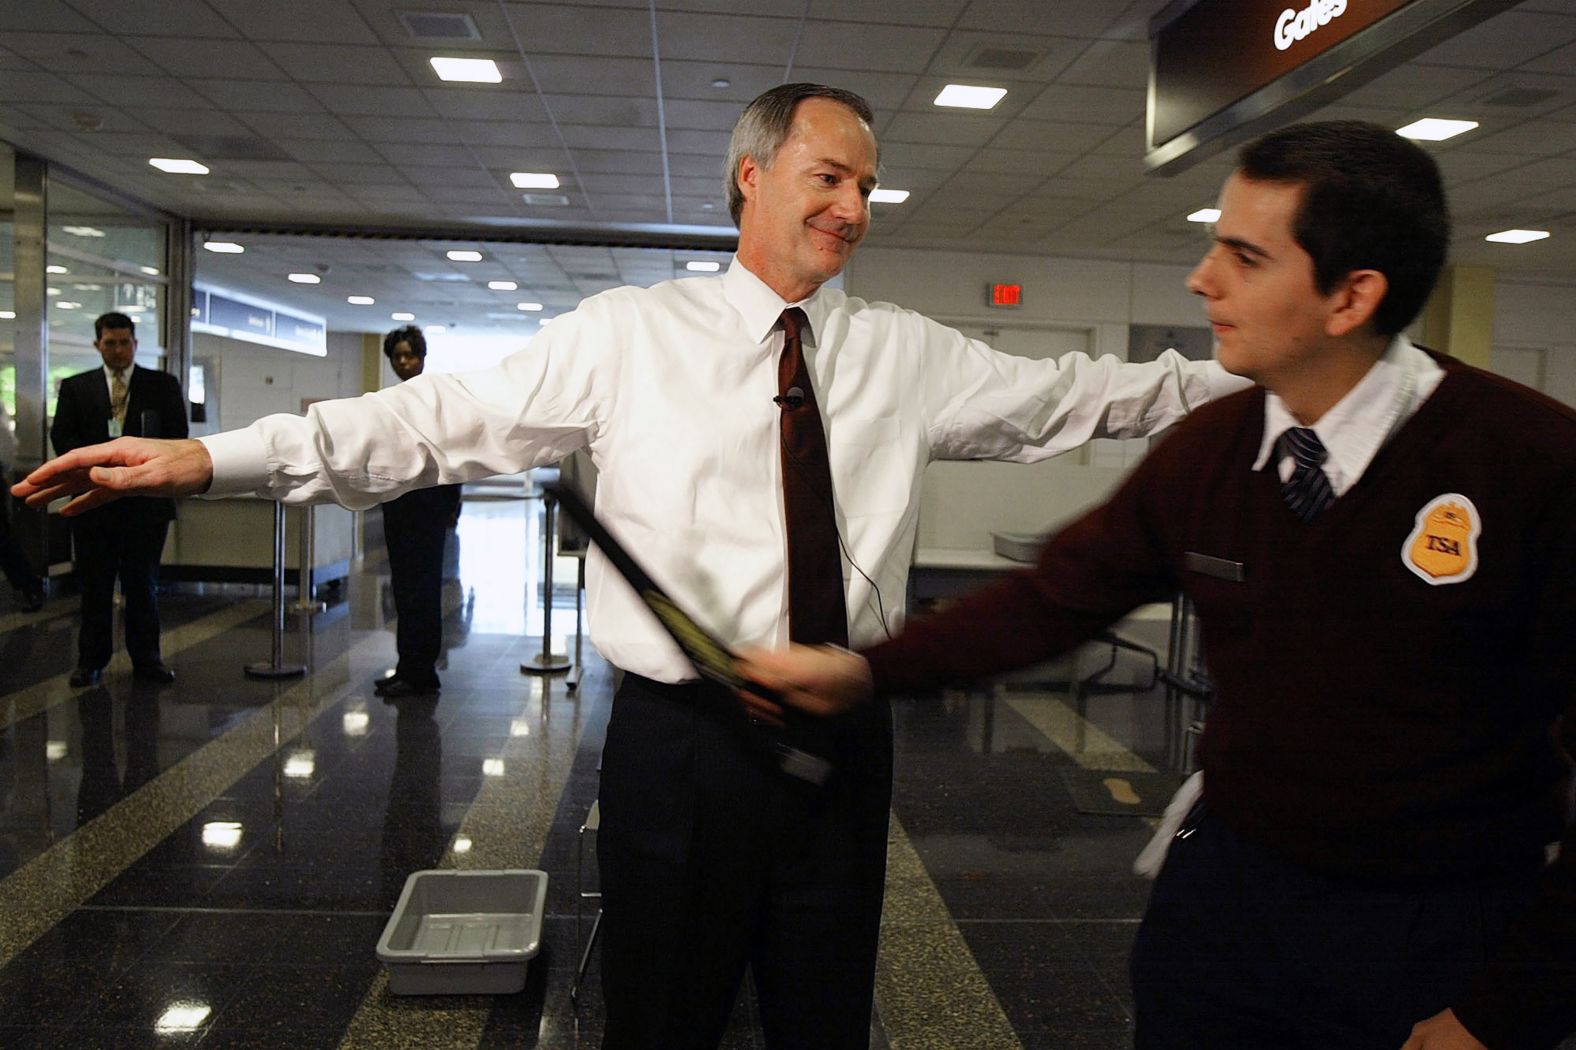 Hutchinson is screened by security while passing through an airport checkpoint in Arlington, Virginia, in 2003. He had begun a three-year stint in the Department of Homeland Security, serving as undersecretary for border and transportation security.